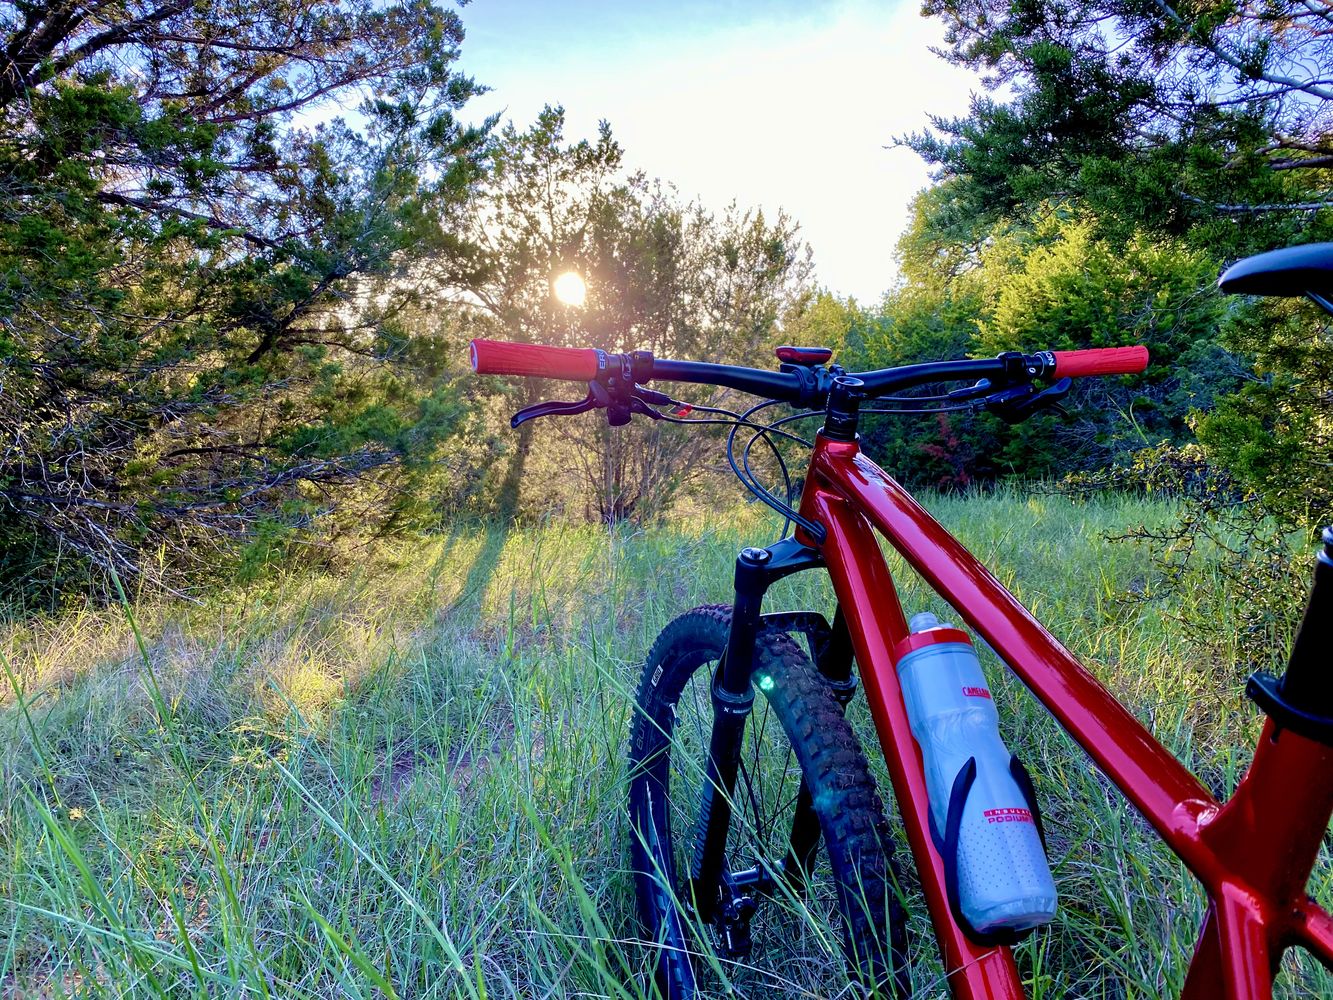 Red mountain bike sits in a grassy field looking at a setting sun through trees in the background